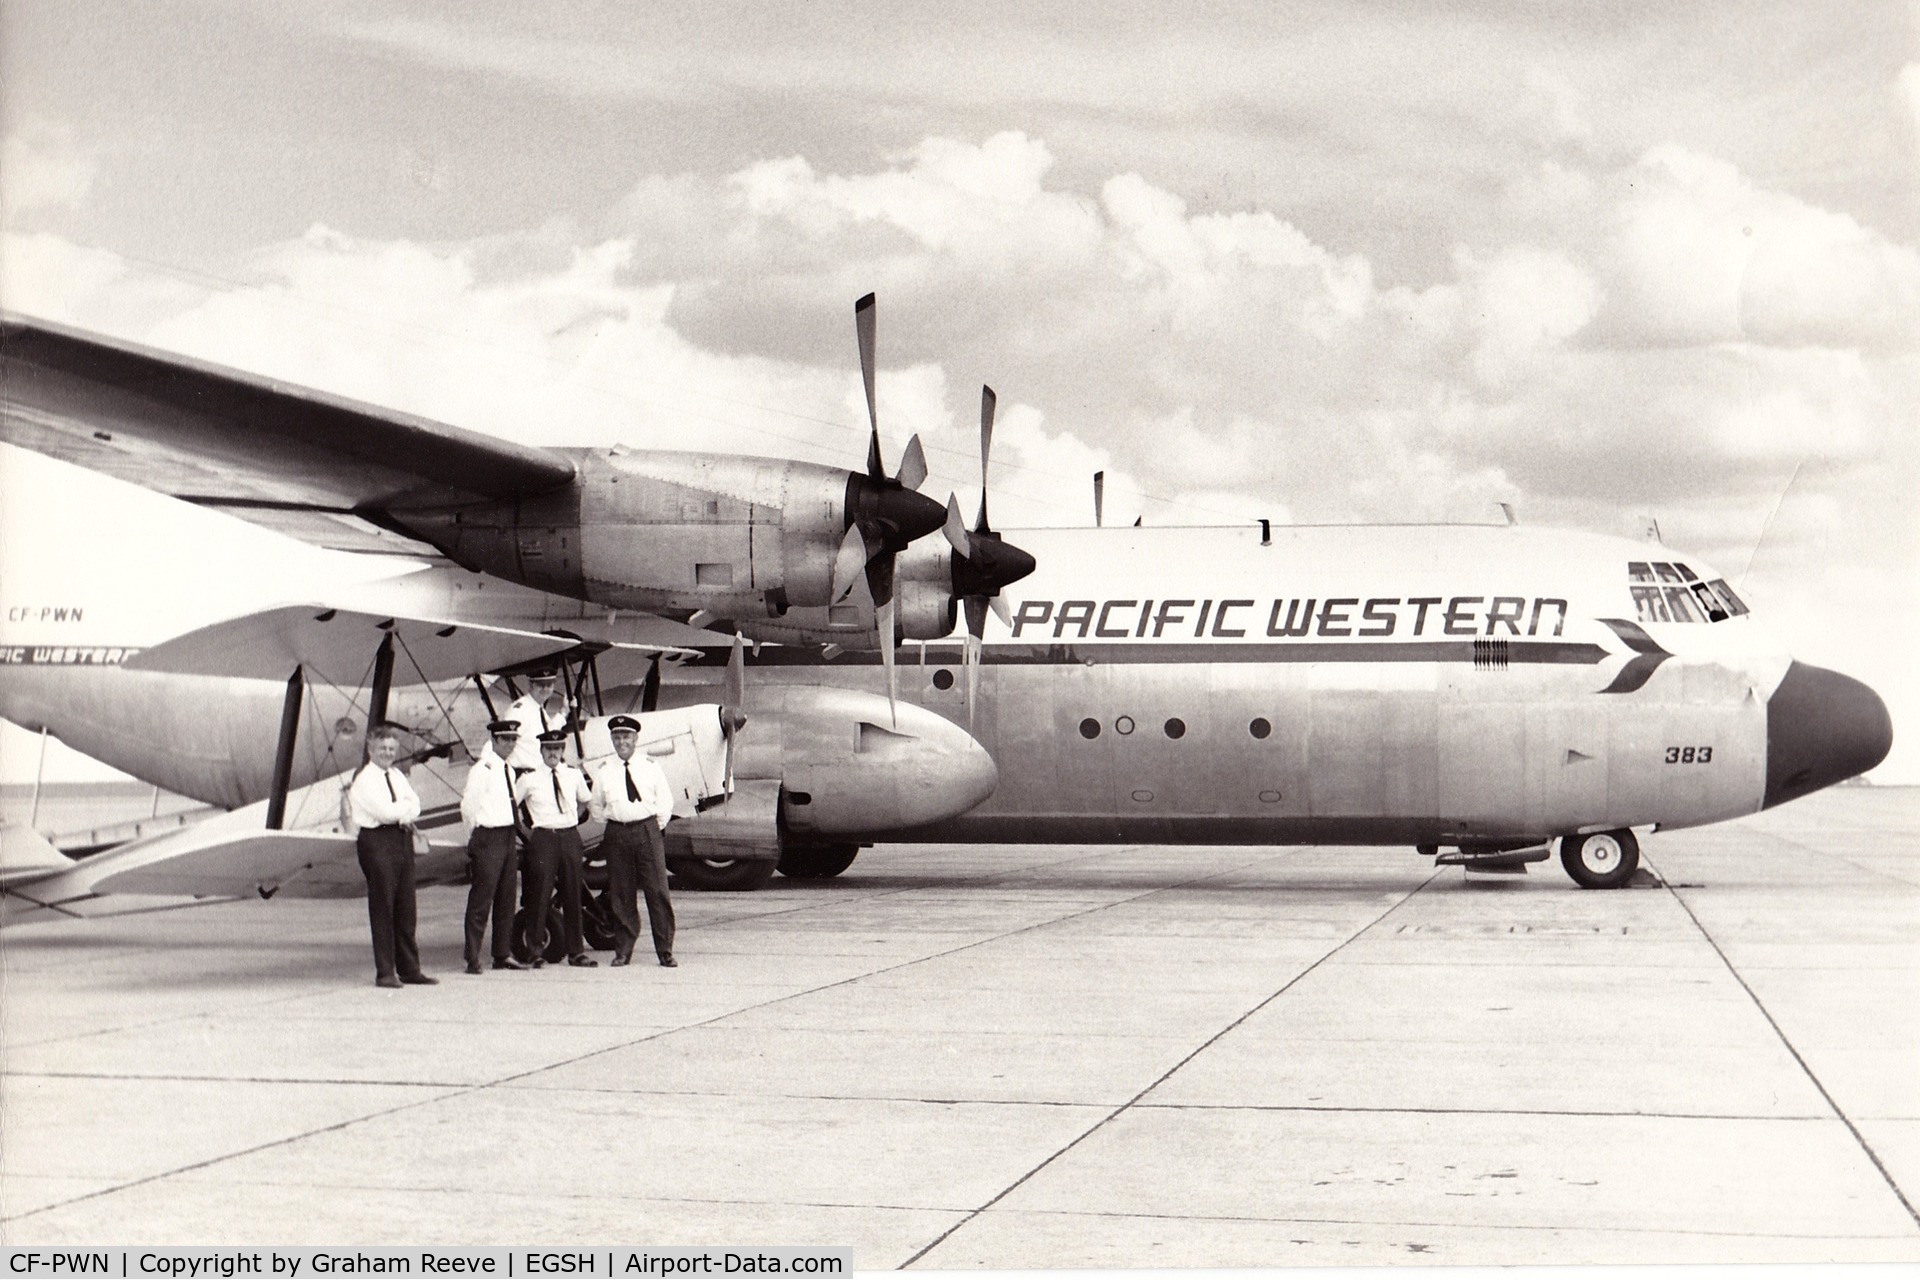 CF-PWN, 1966 Lockheed L-382B Hercules C/N 4129, I recently found this photo of CF-PWN at Norwich. G-ANMV Tiger Moth is pictured with the crew and CFI of the Norfolk and Norwich aero club.